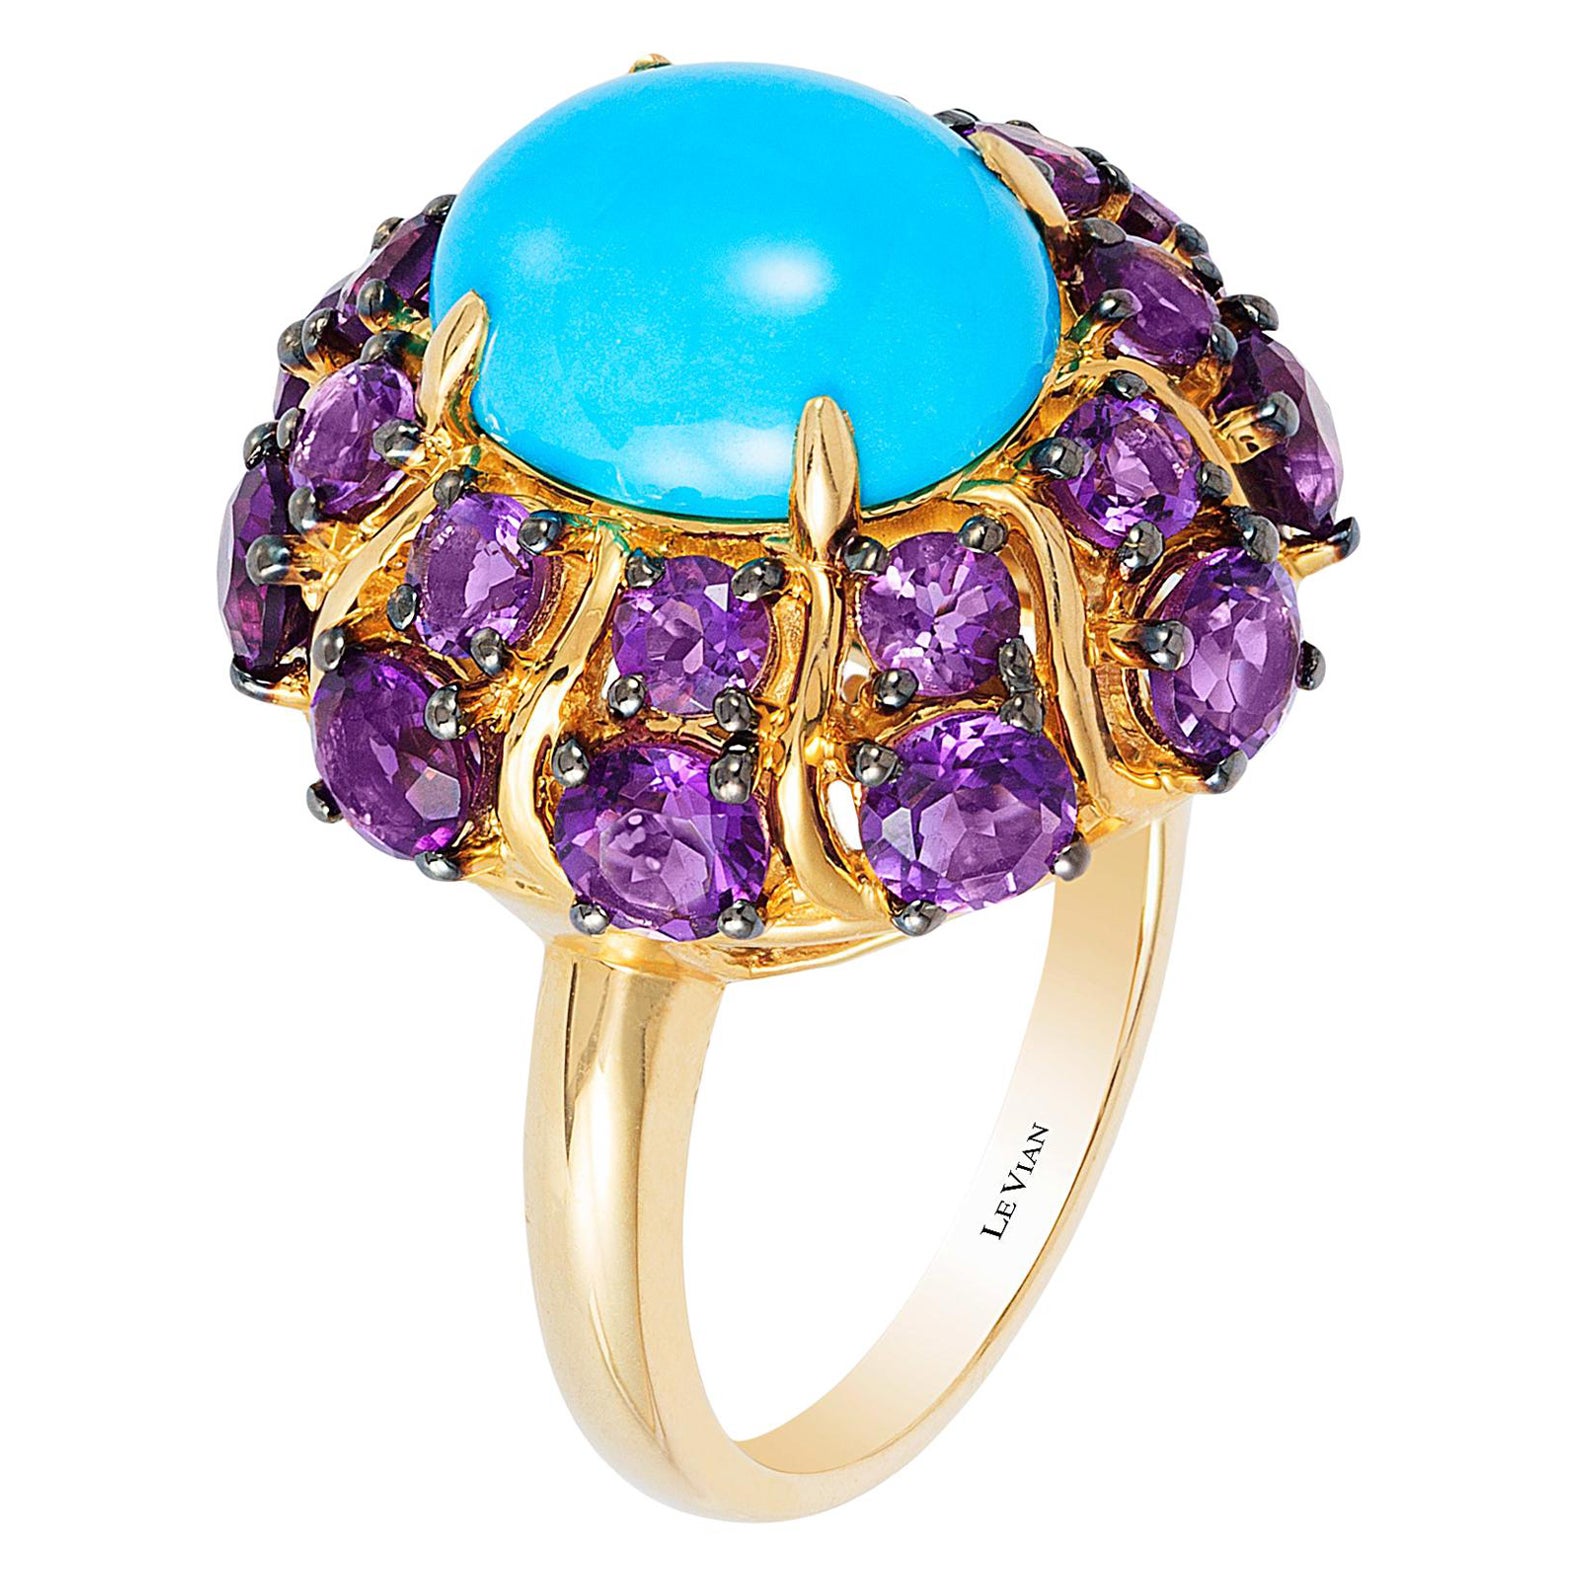 Carlo Viani 14K Yellow Gold Sleeping Beauty Turquoise and Amethyst Cocktail Ring